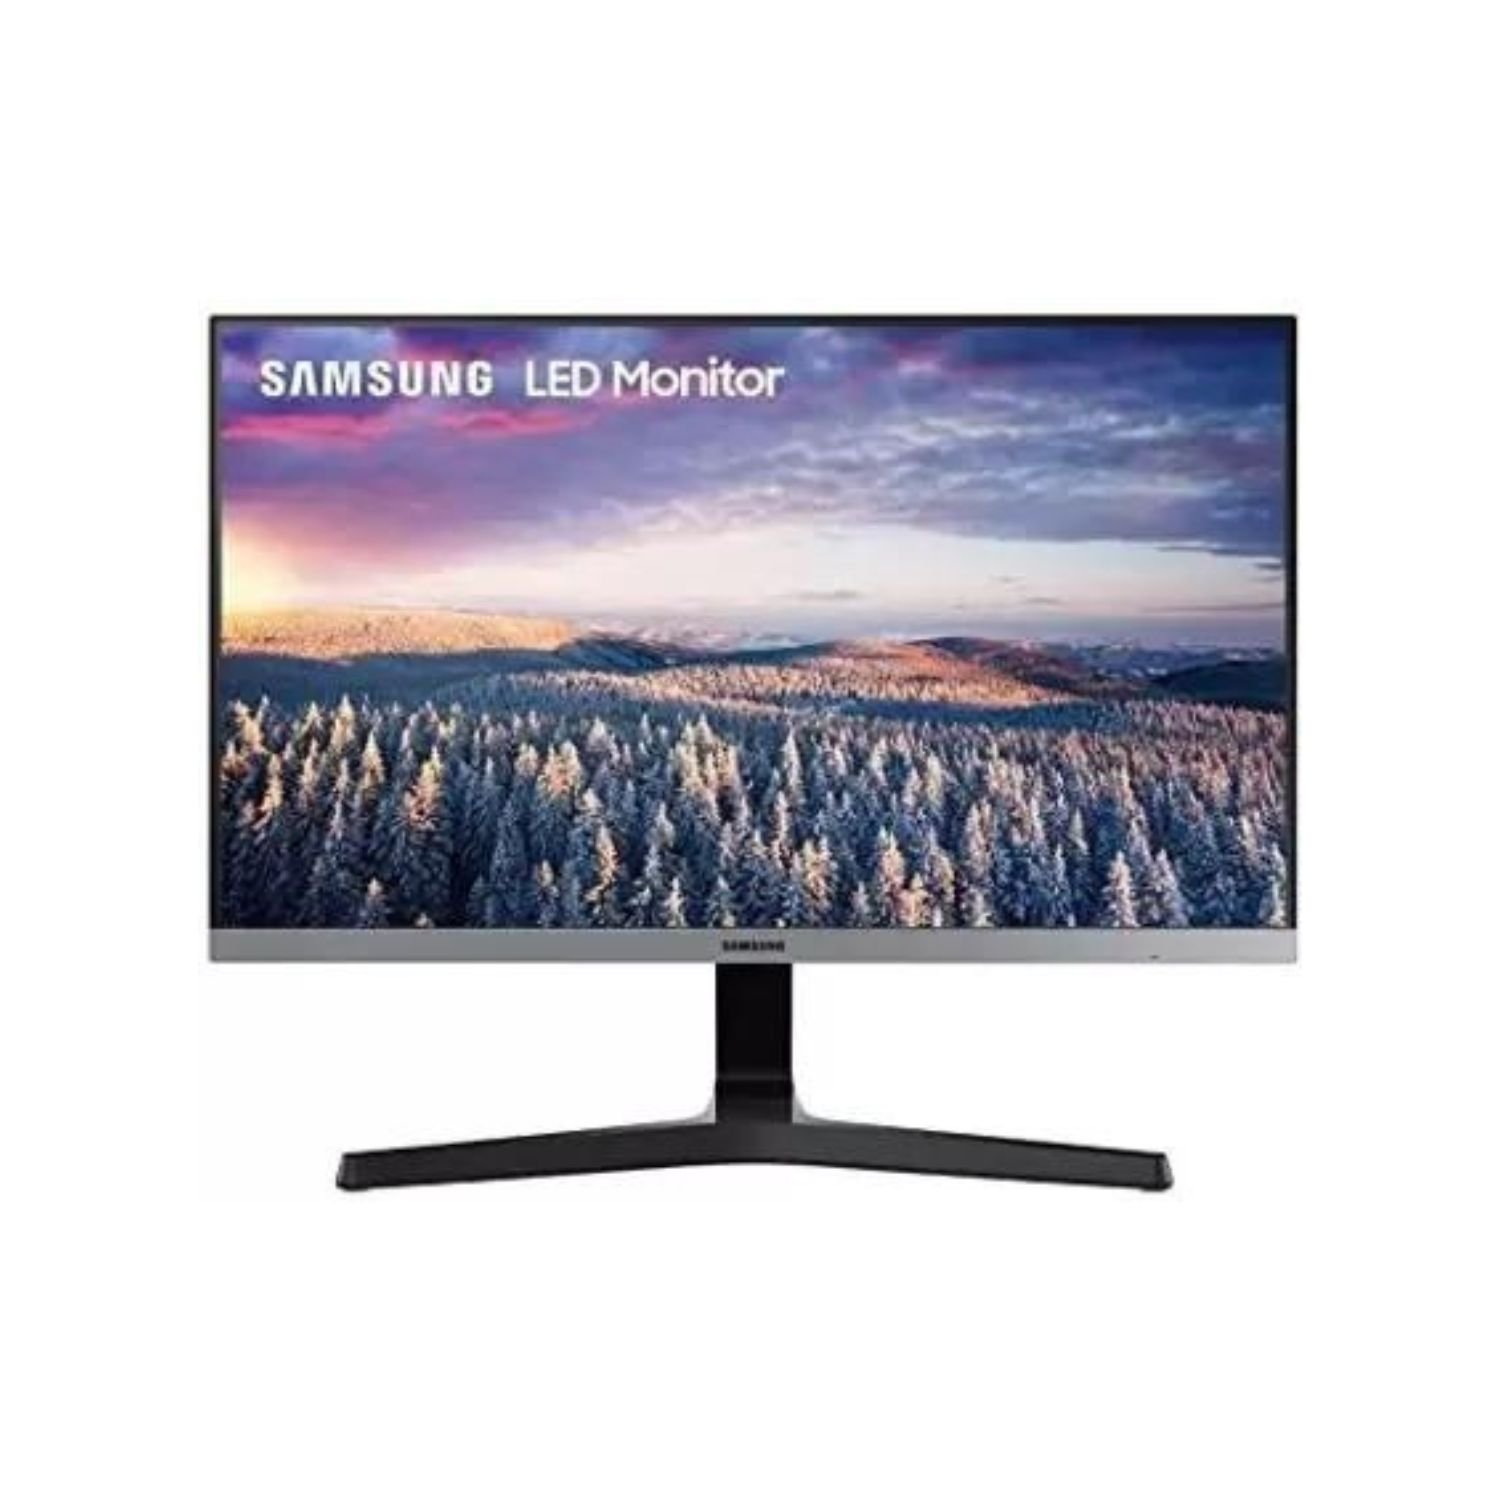 Samsung 24Inch FHD Monitor at Lowest